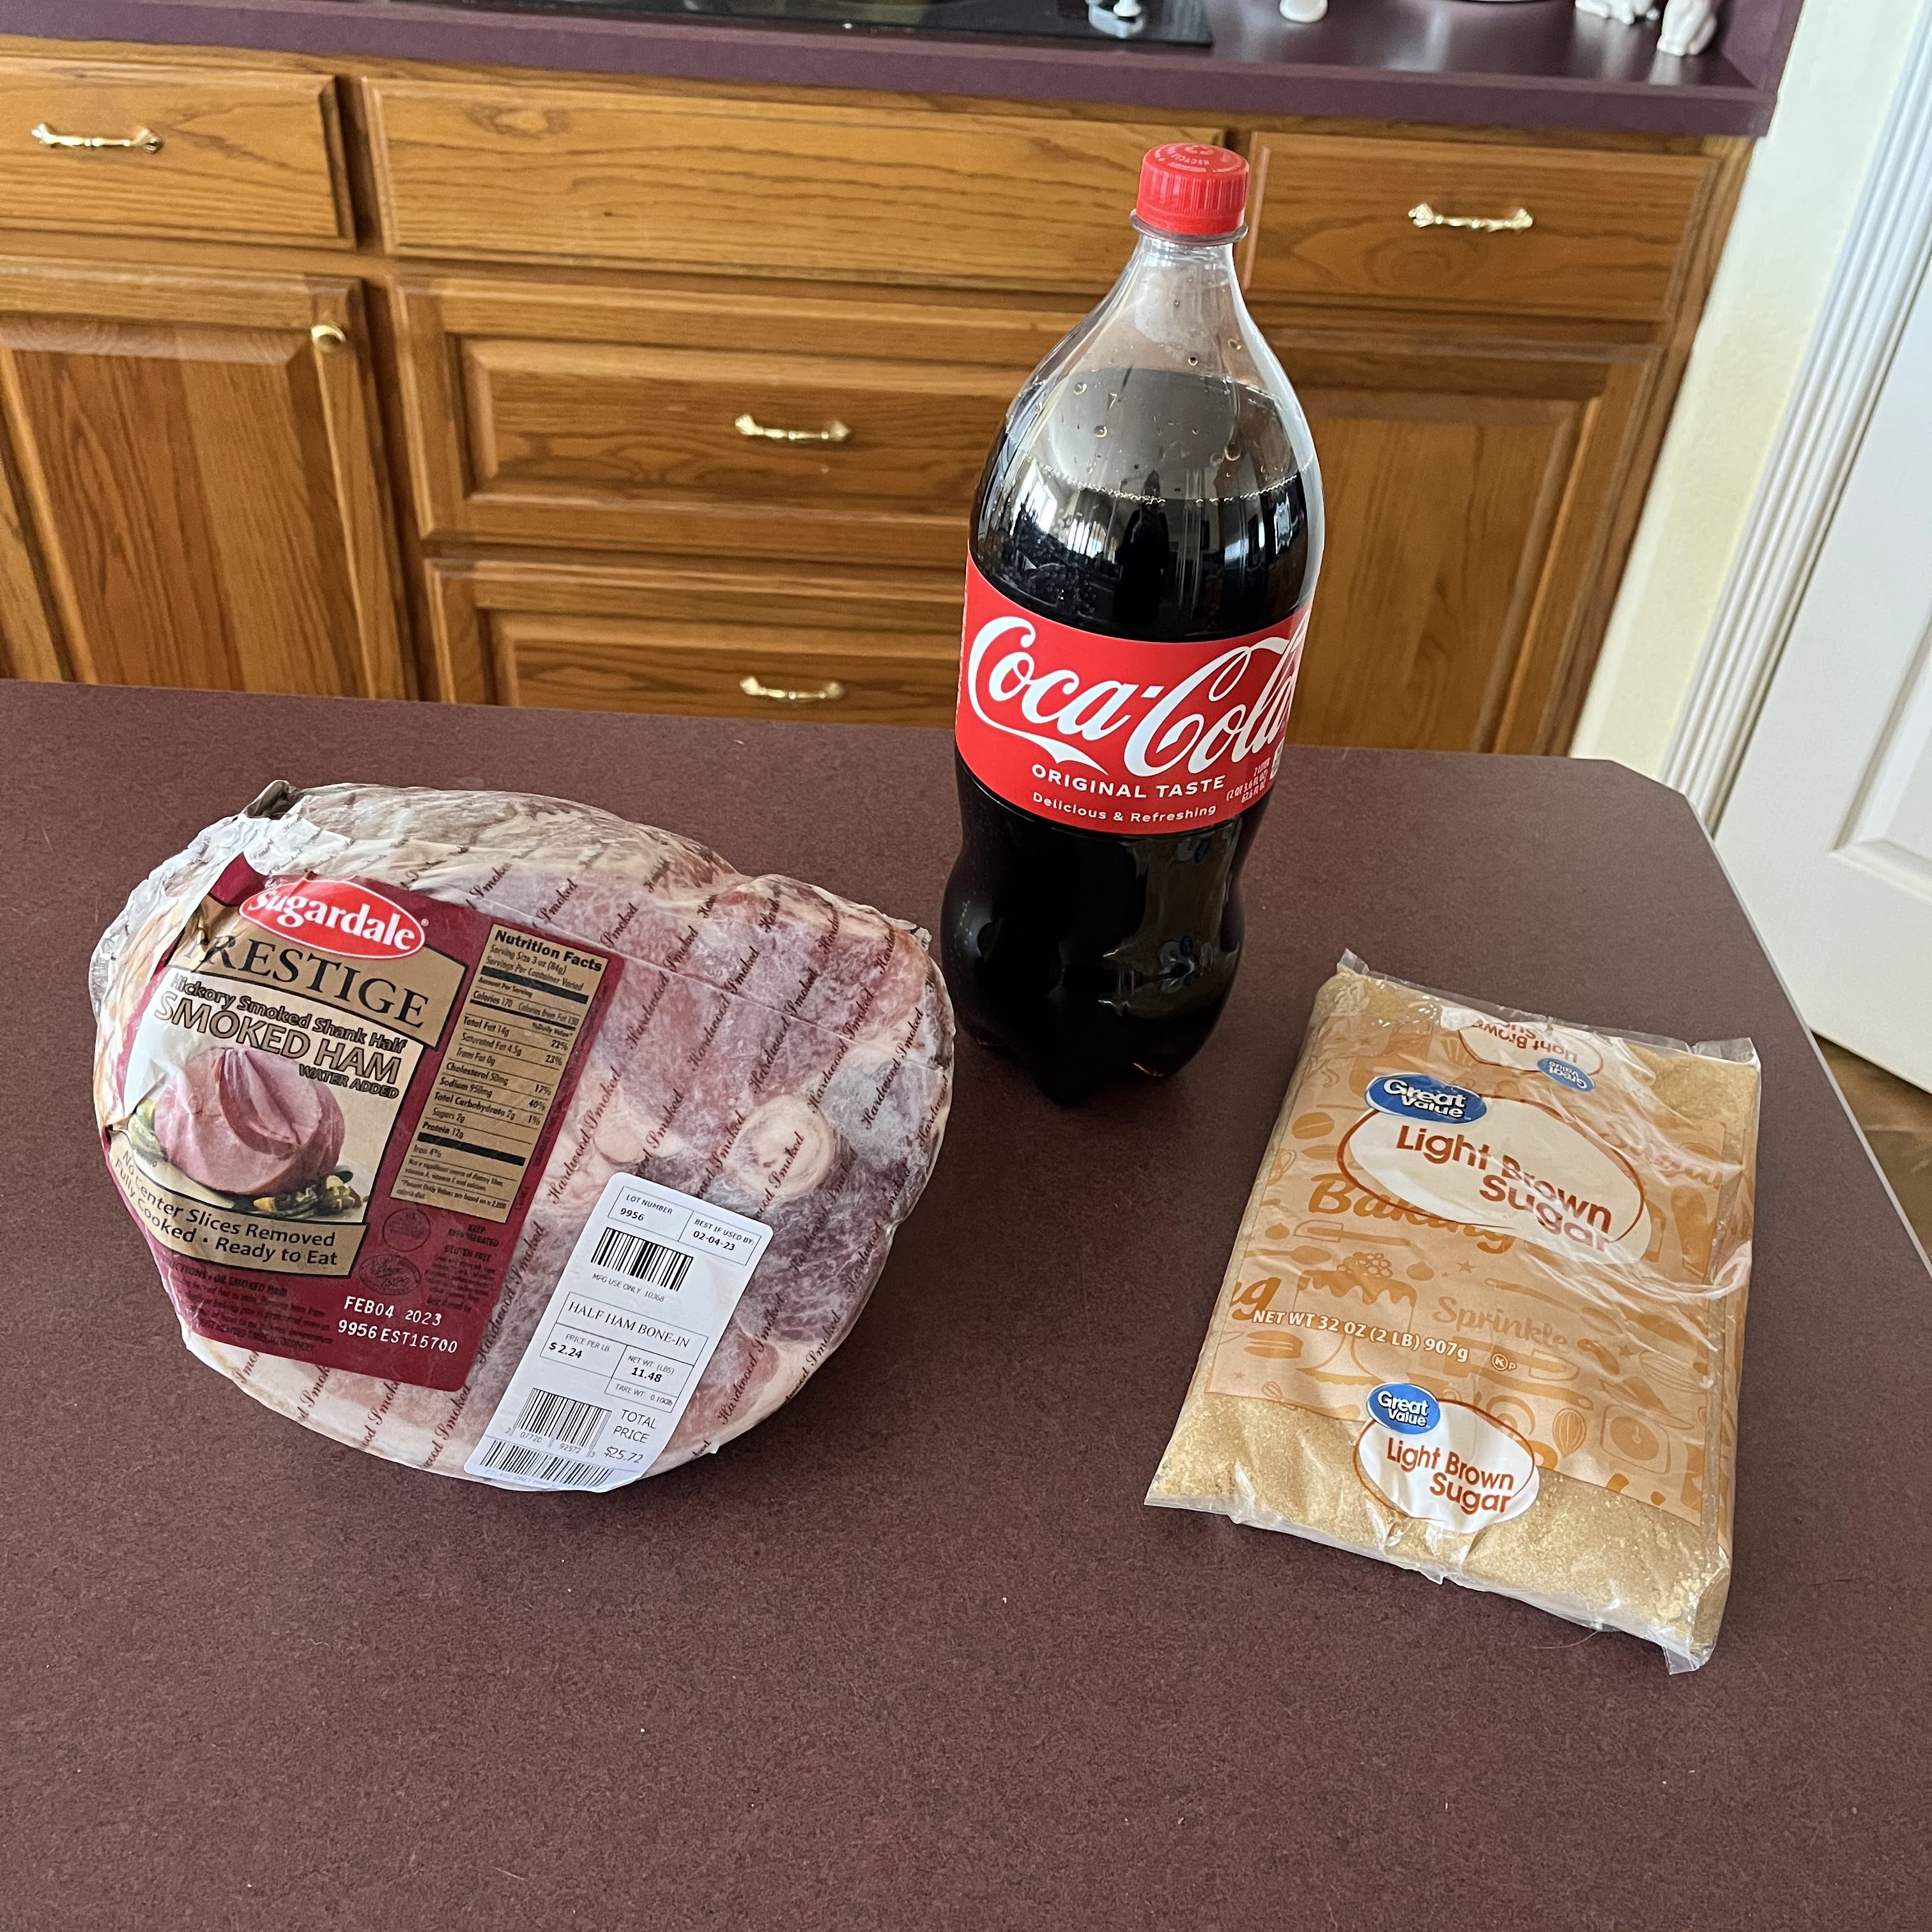 Ingredients for my dad's easy bake ham recipe